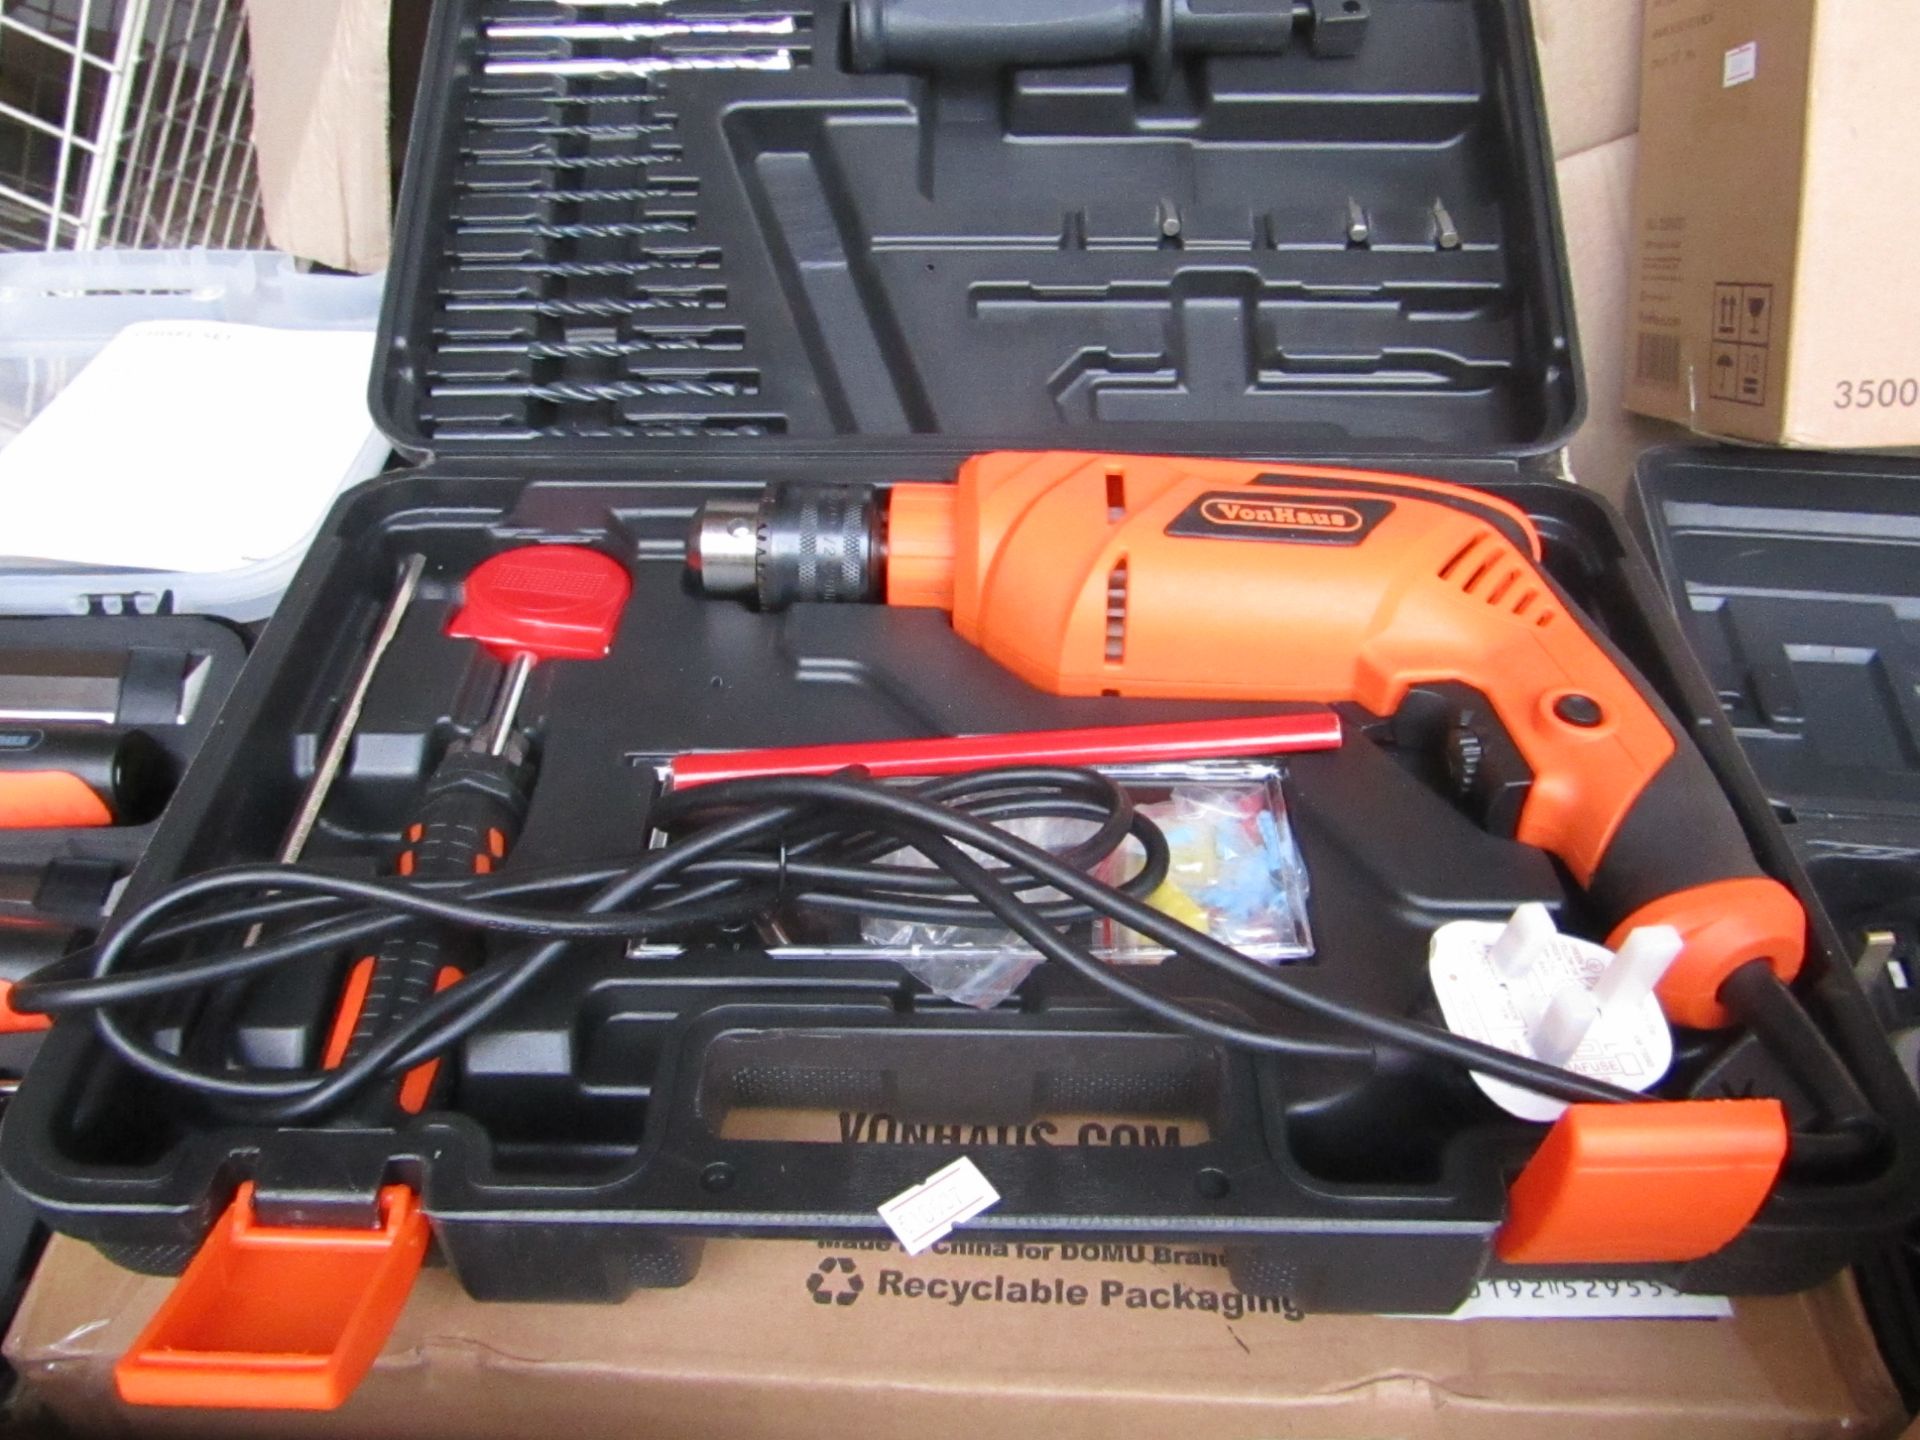 710w Impact drill with accessory set, tested working, complete and boxed. Please note by bidding